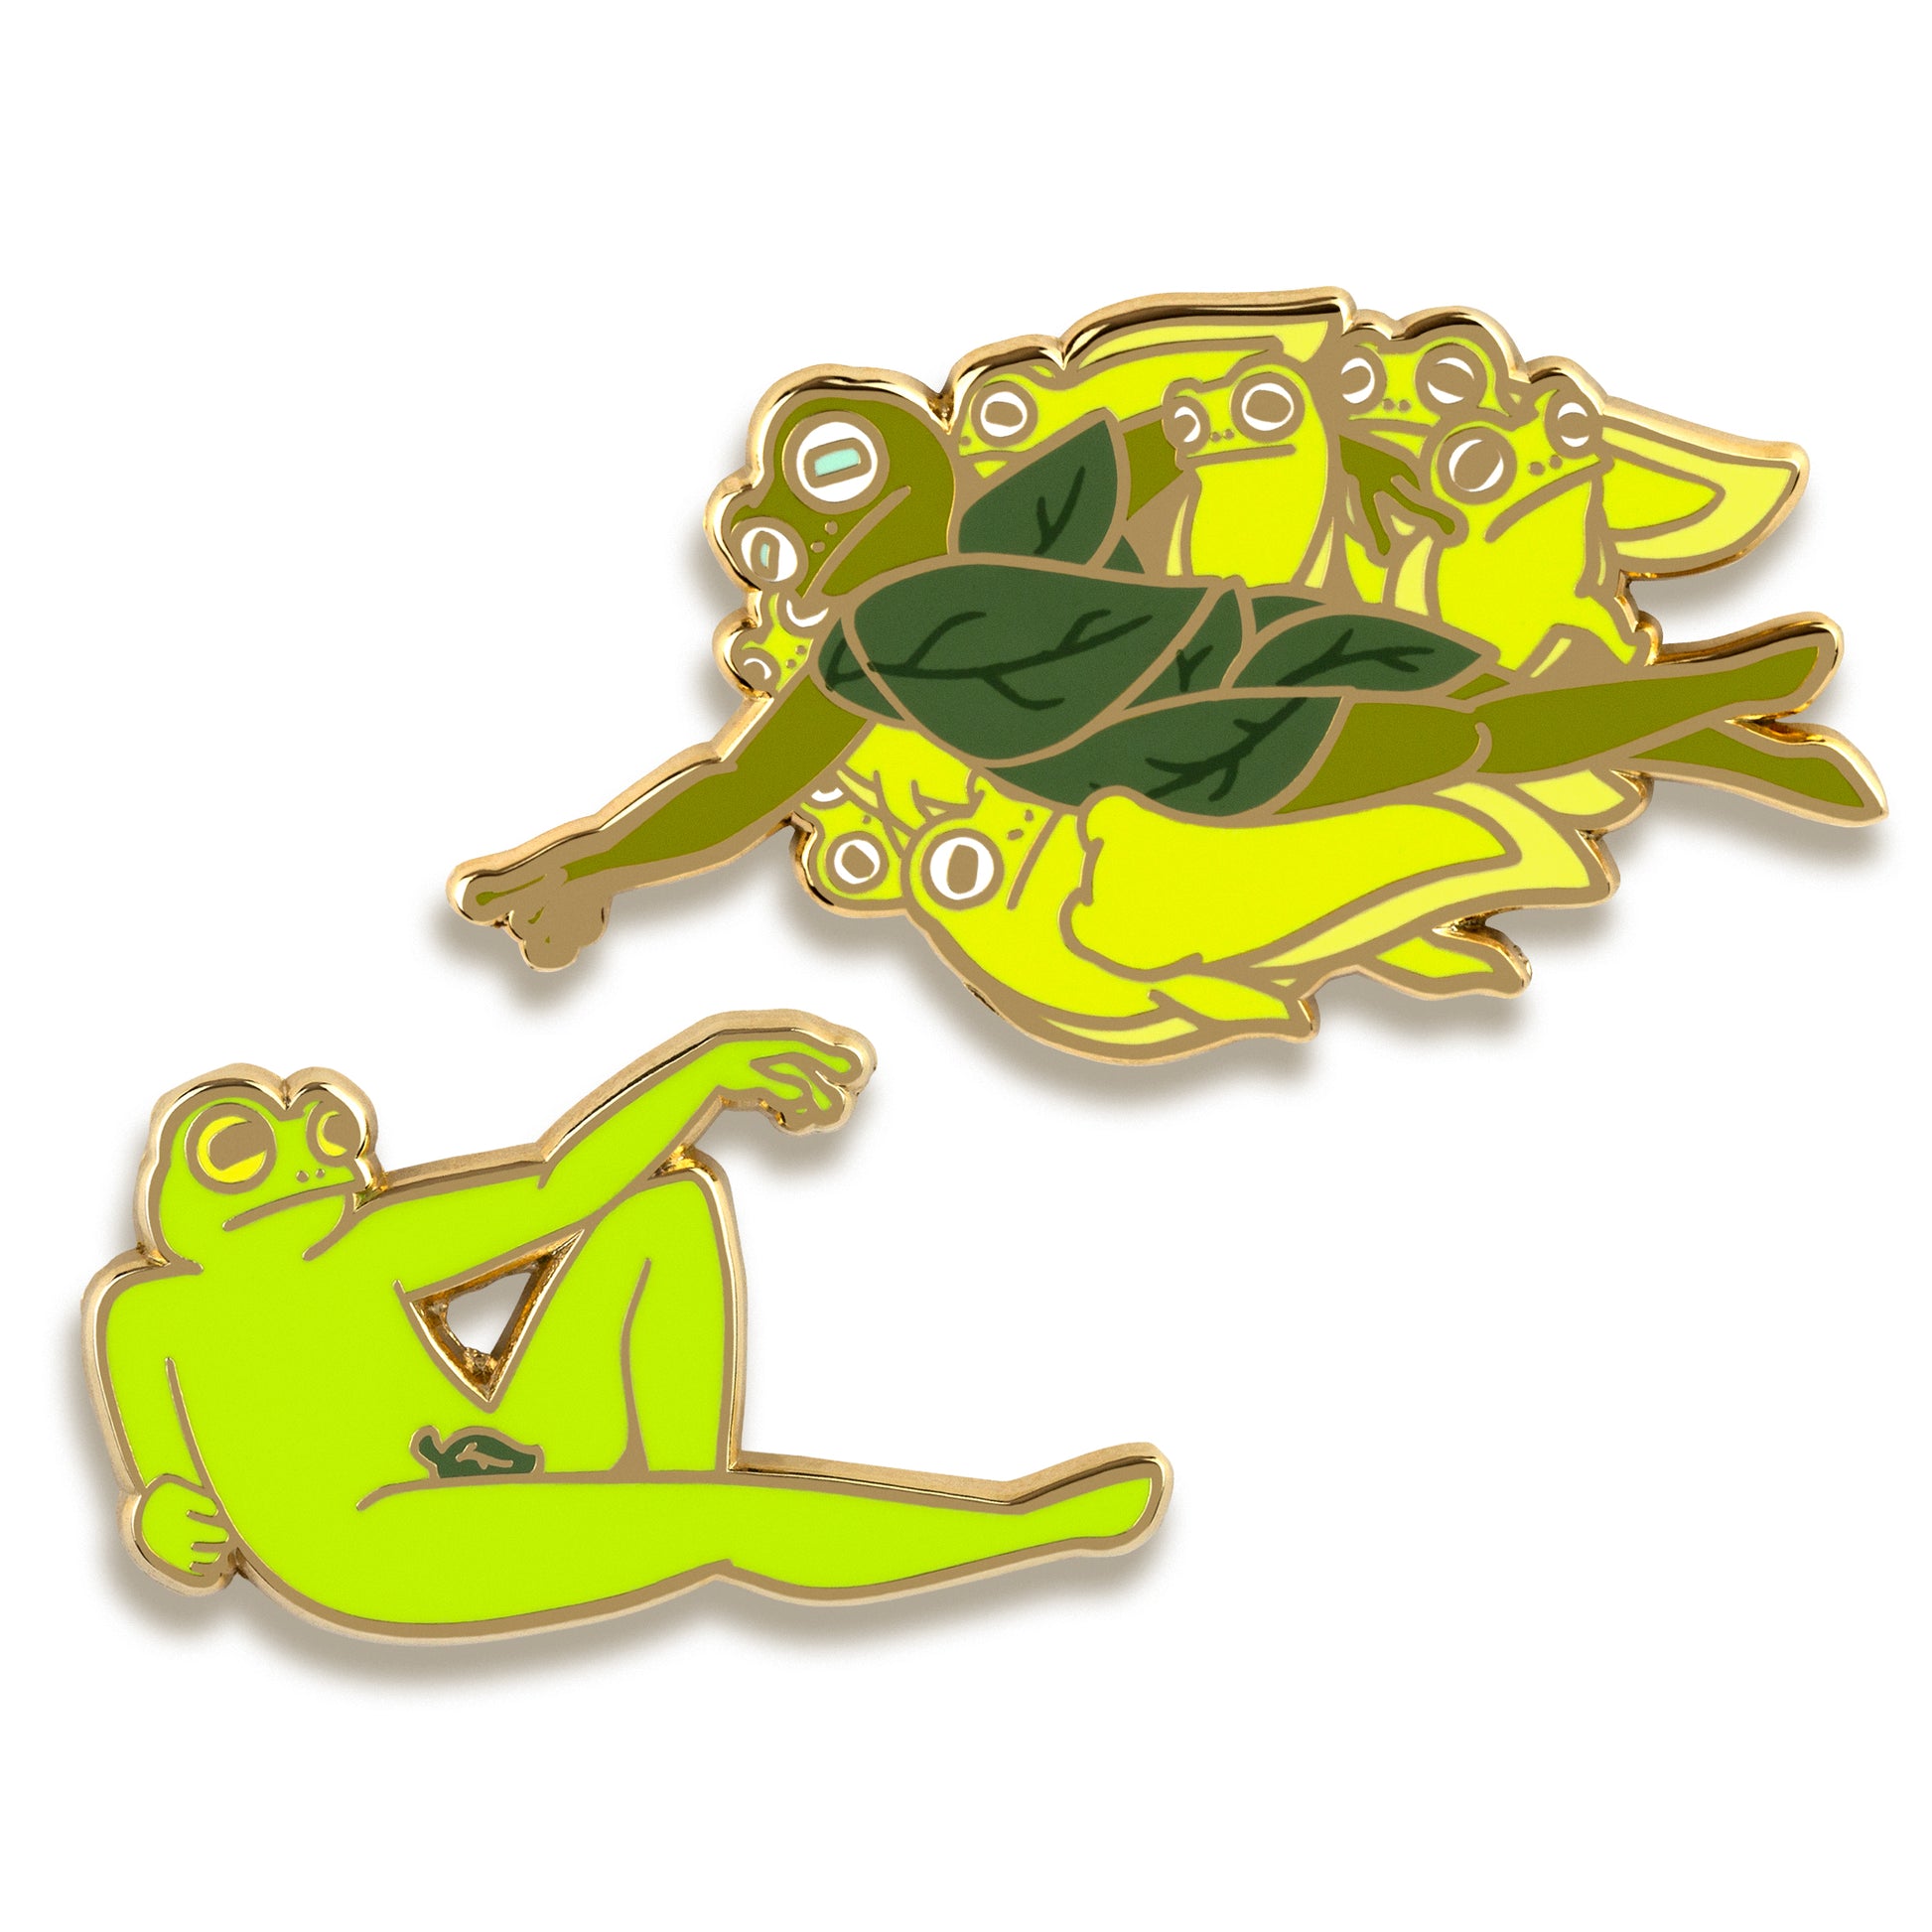 The Creation of Frog Enamel Pins by Toku Arts – Pinultimate